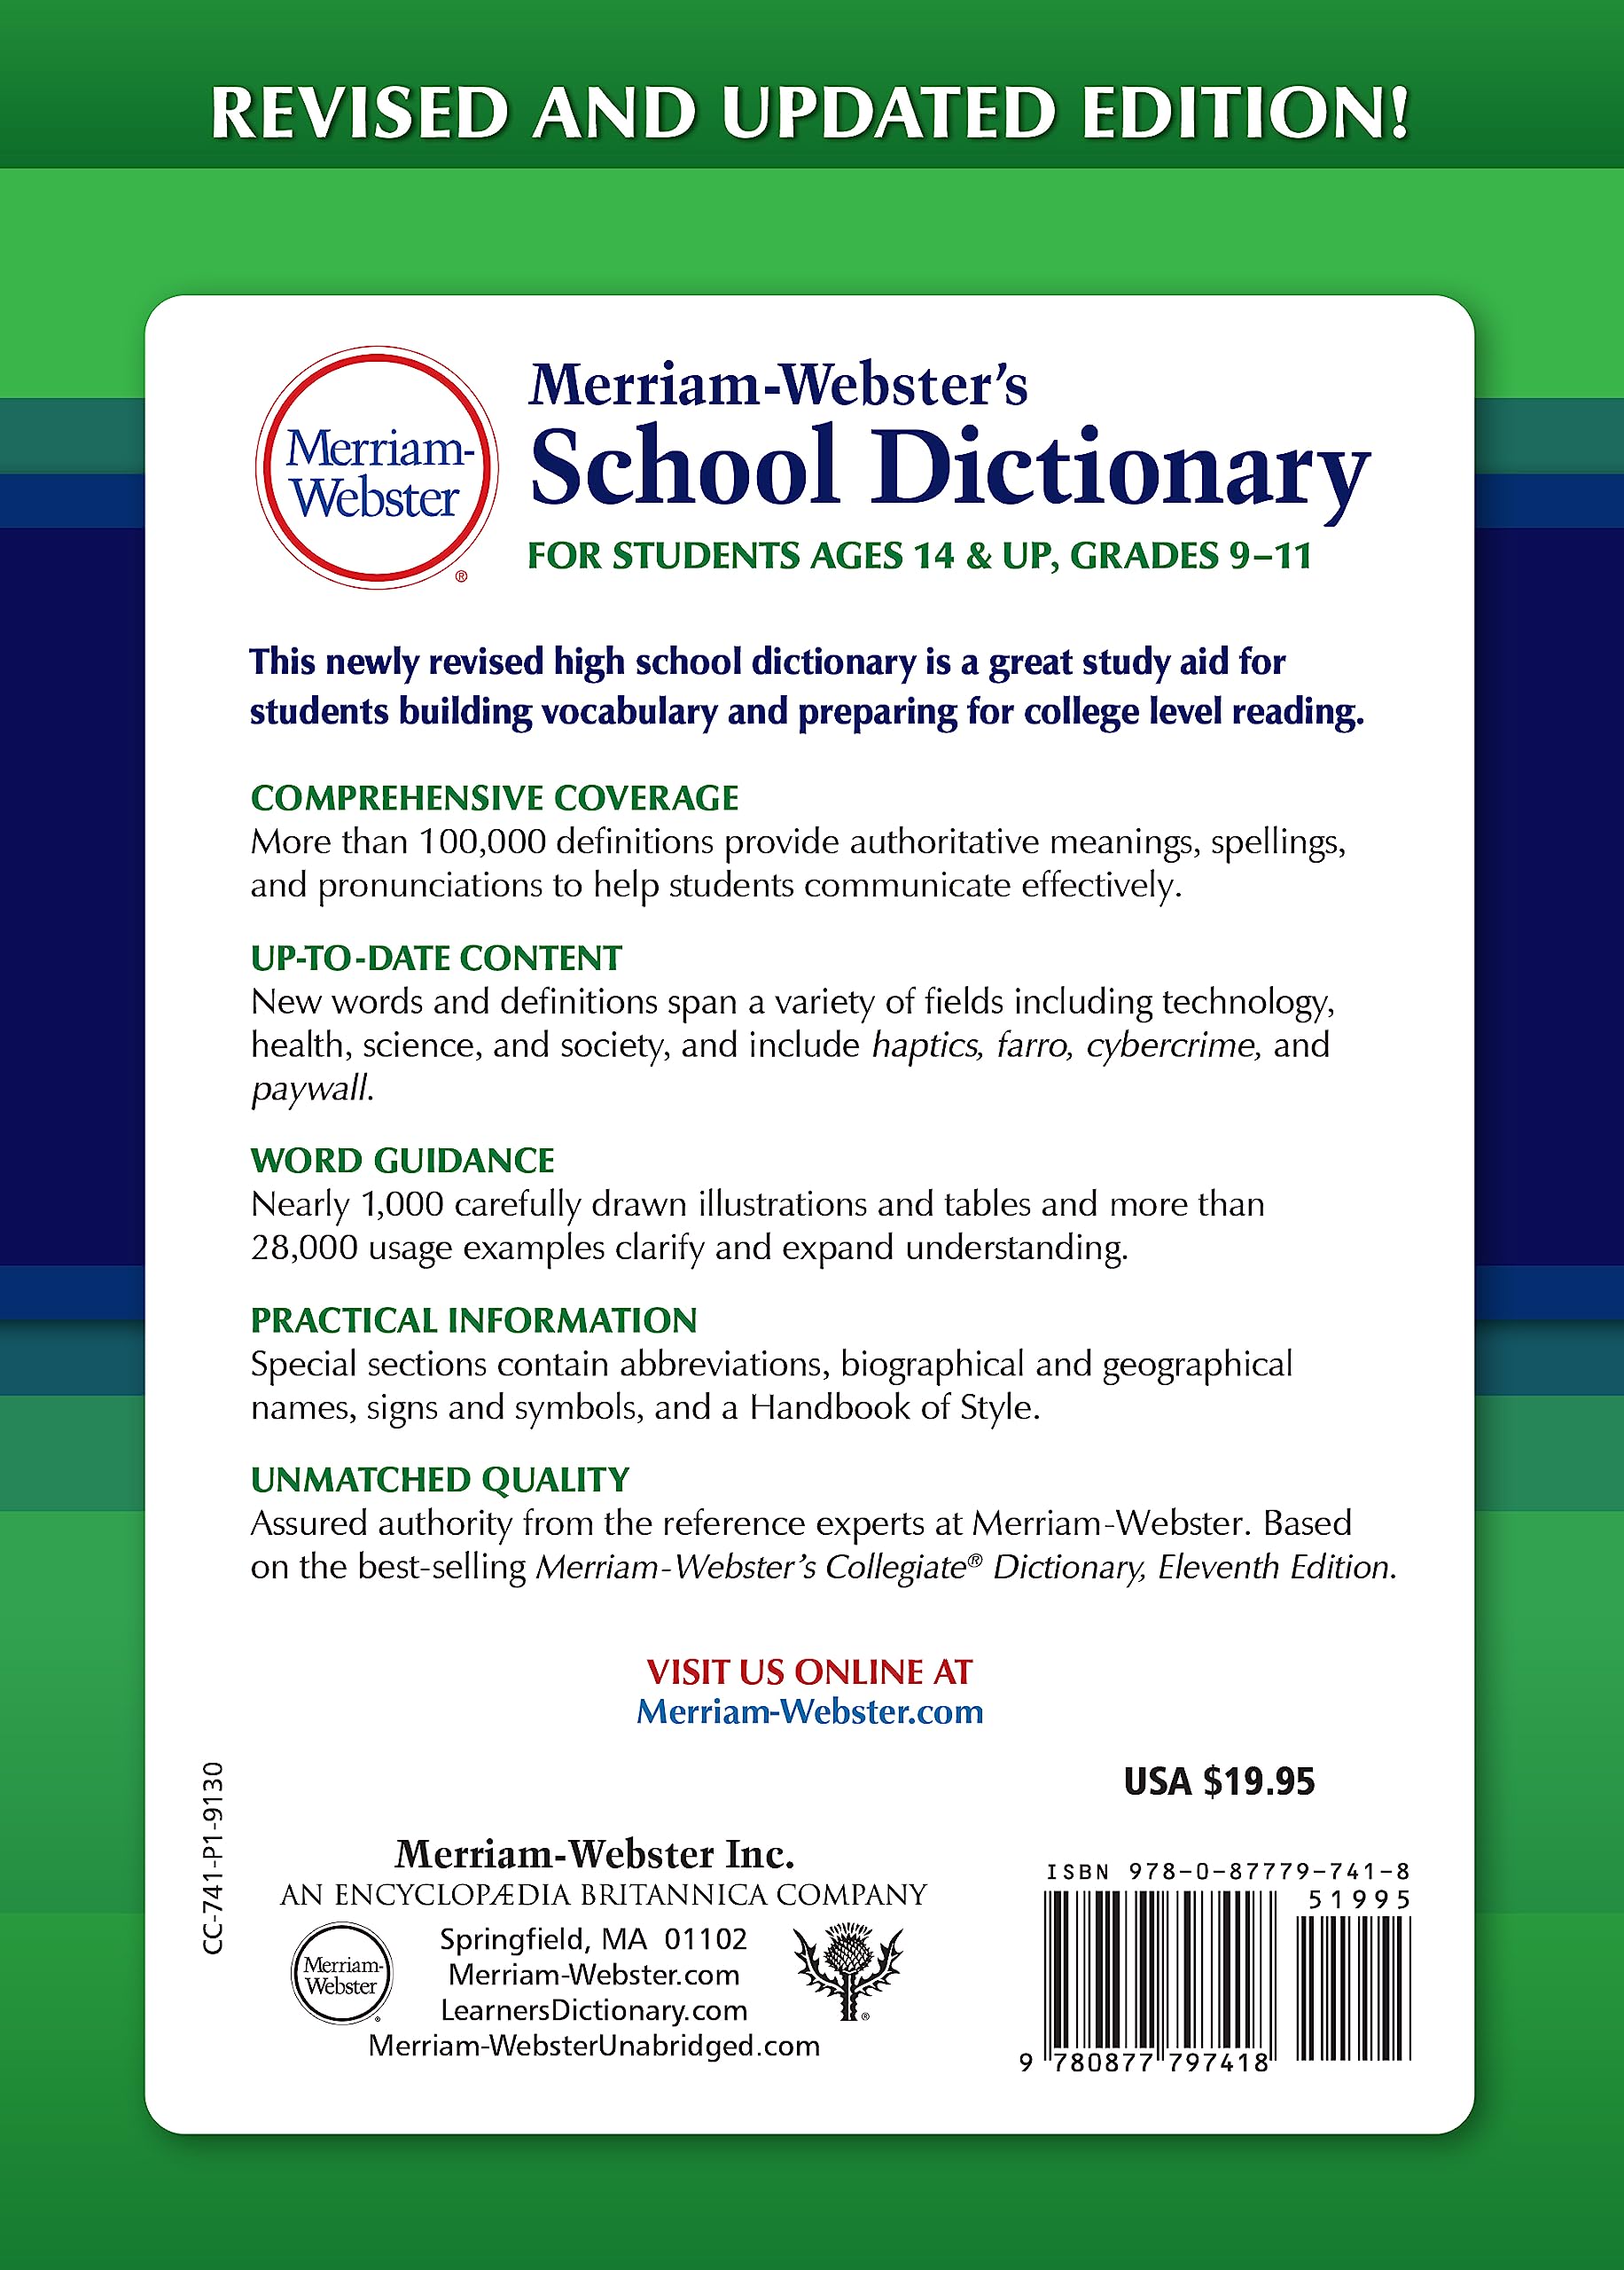 Merriam-Webster's School Dictionary, Newest Edition | The Authoritative High School Dictionary